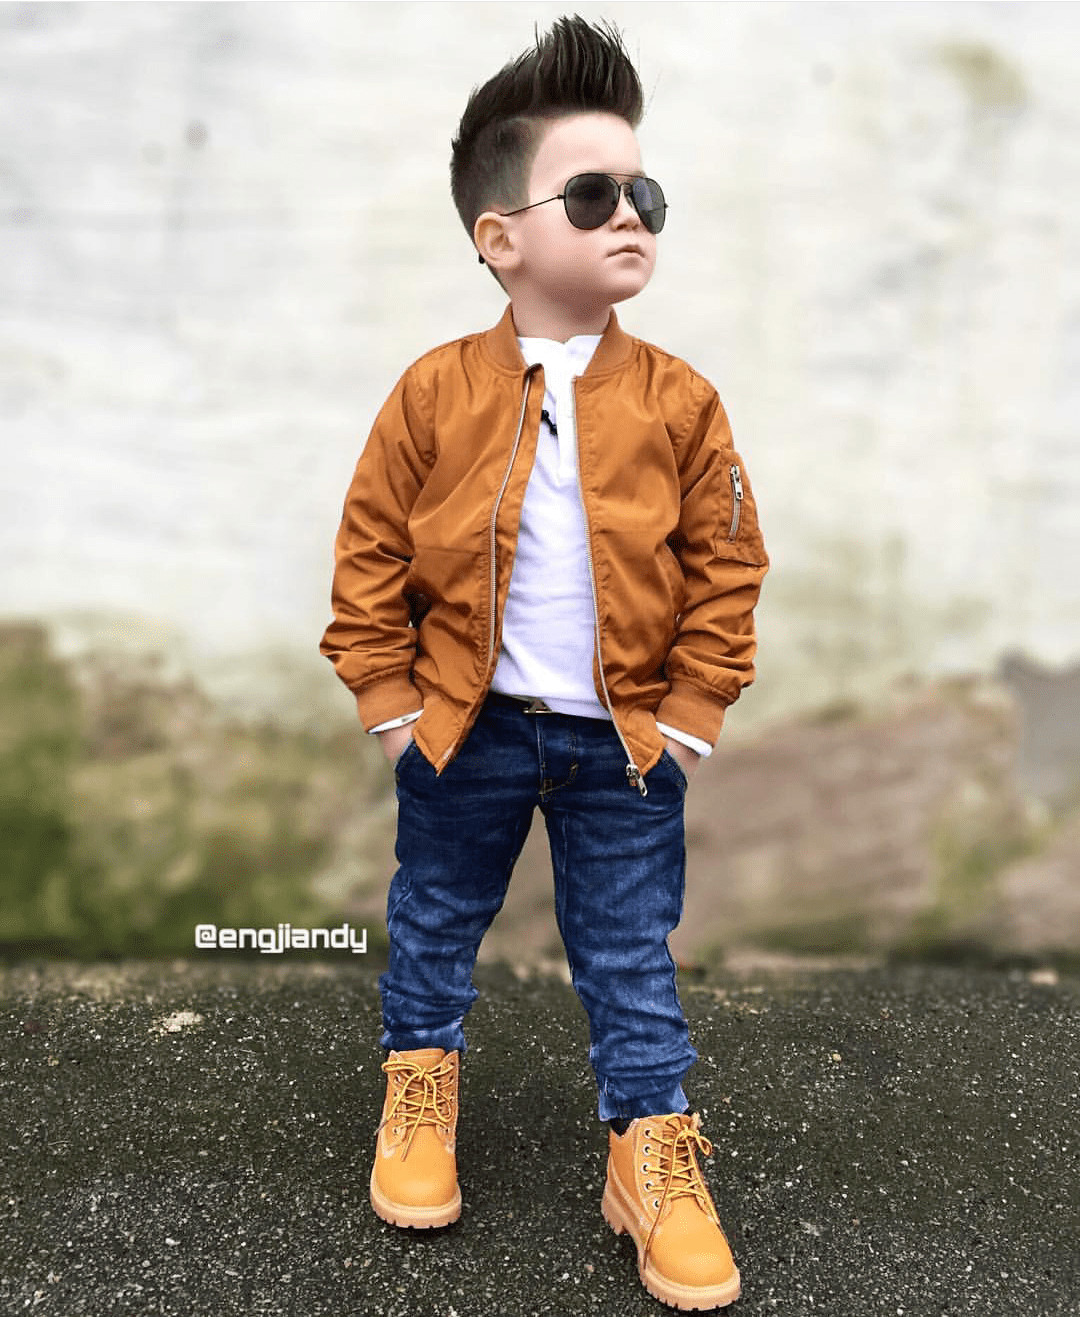 Kids Fashion Boys
 This Month s Best Street Style Looks of boy Kids Fashion